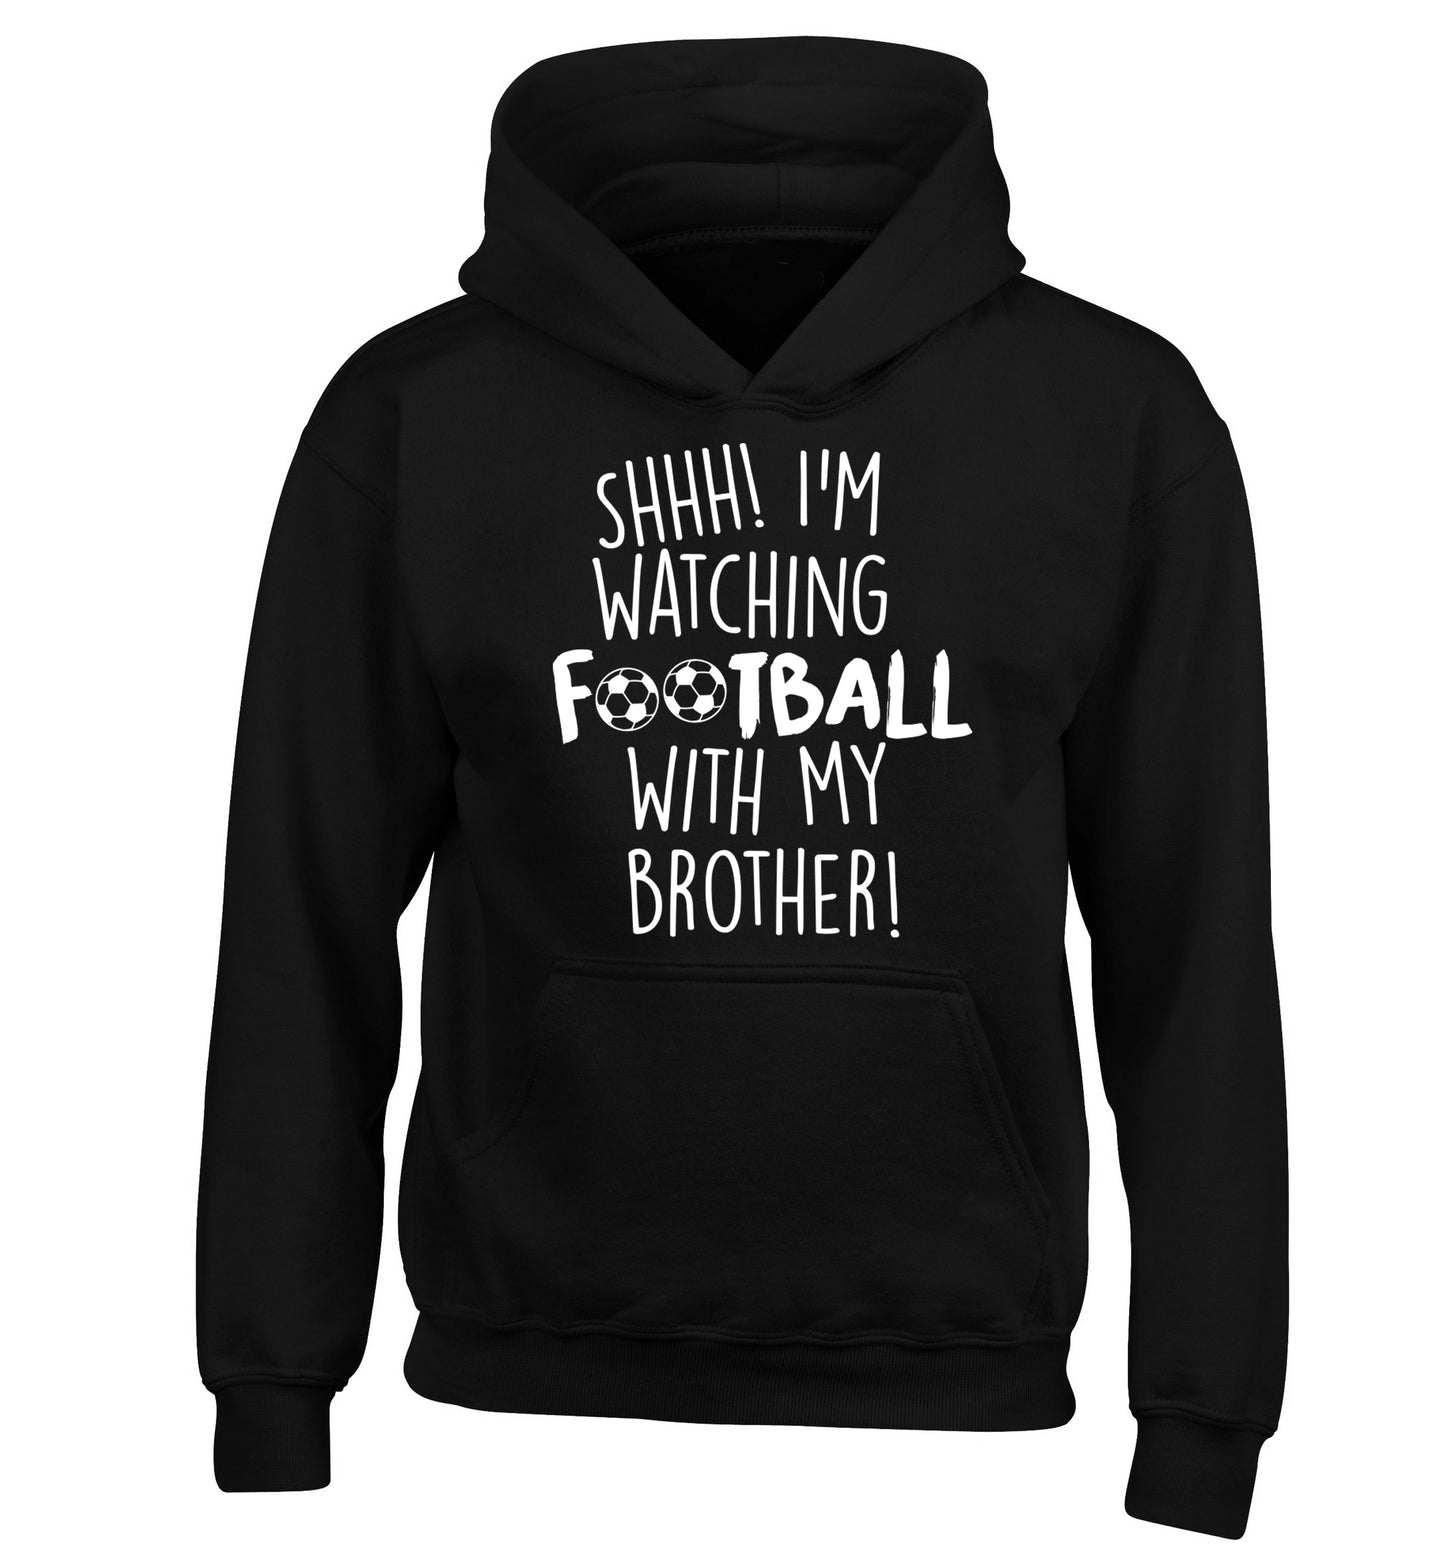 Shhh I'm watching football with my brother children's black hoodie 12-14 Years